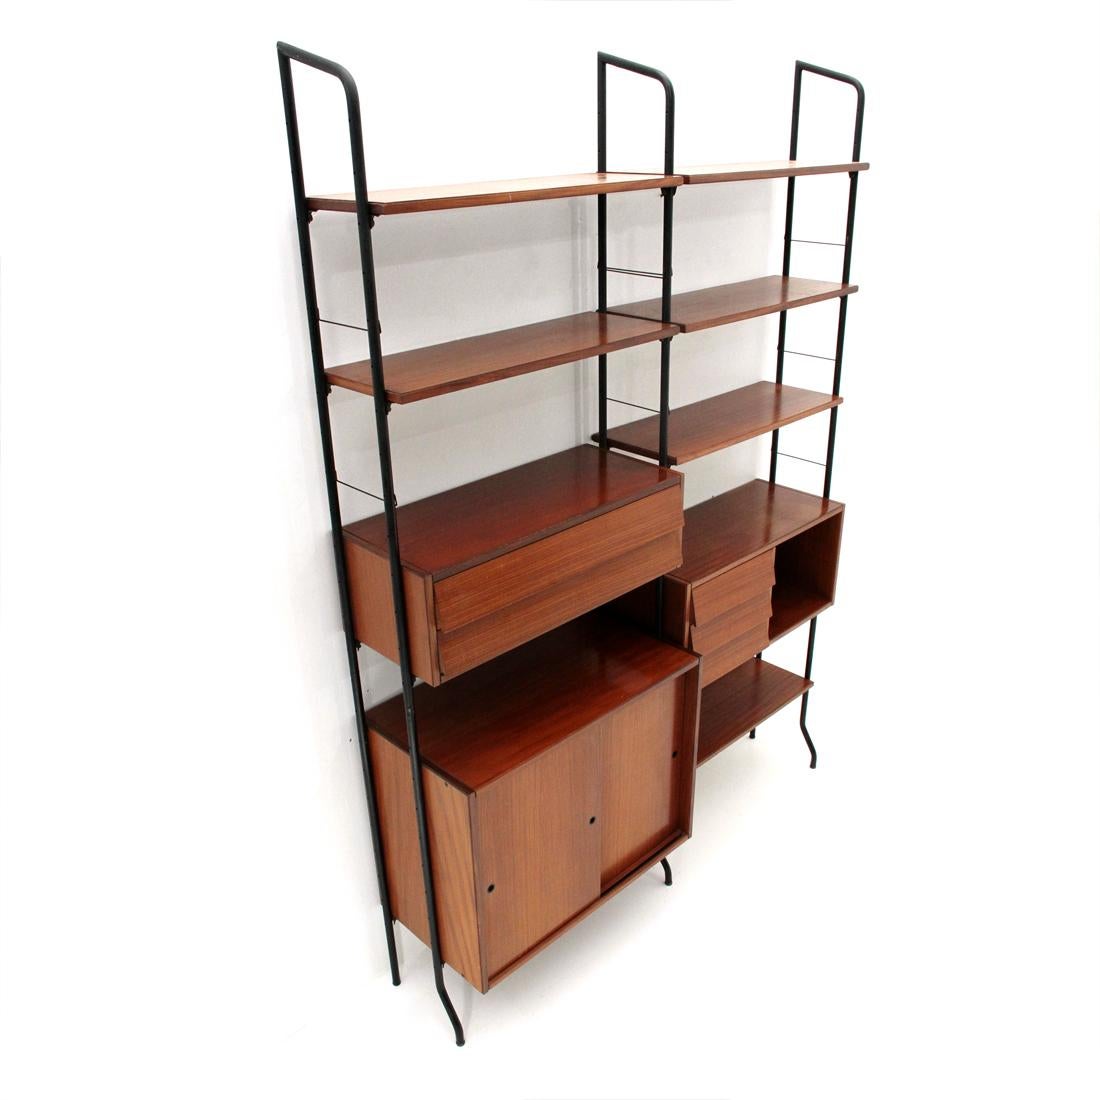 Library produced by Amma di Torino in the 1950s. 
Uprights in black painted folded metal tubing. 
Containers, drawers and shelves in veneered teak wood. 
Brass screws. 
Good general conditions, some signs and haloes due to normal use over